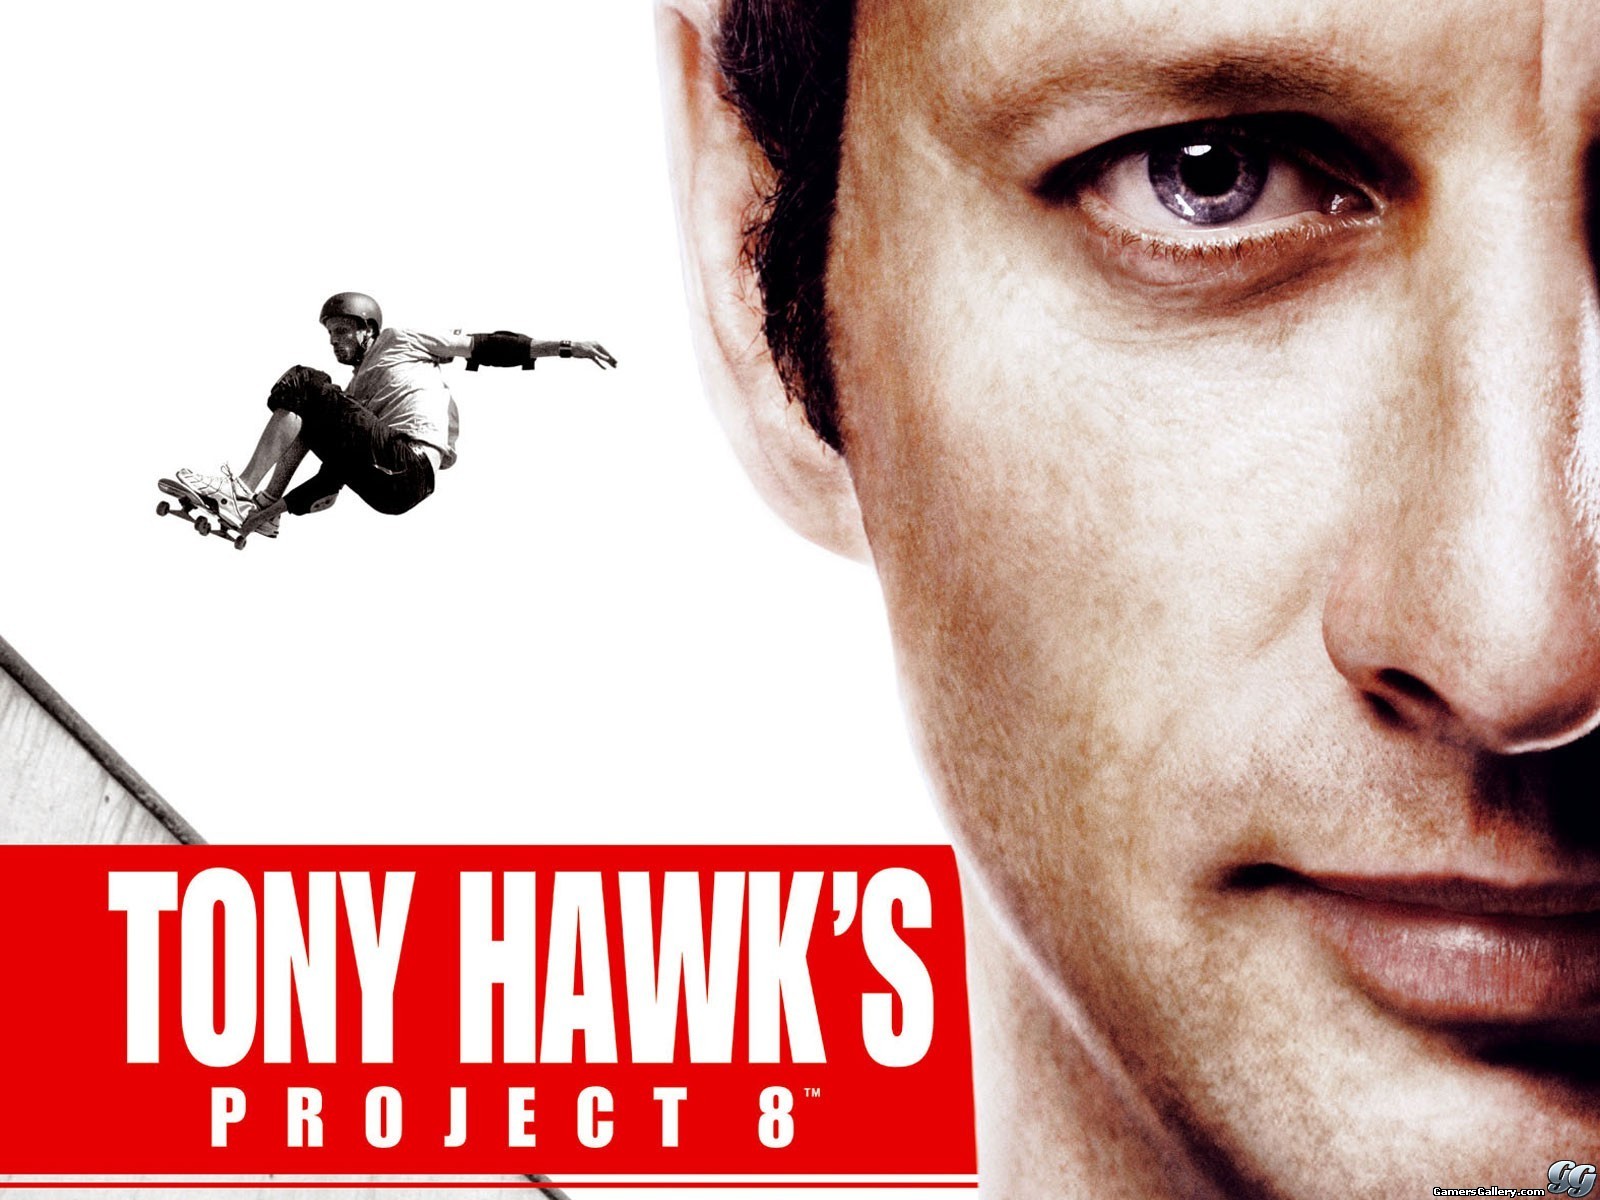 Gamers Gallery - Tony Hawk's Project 8 (Exclusive Wallpaper)